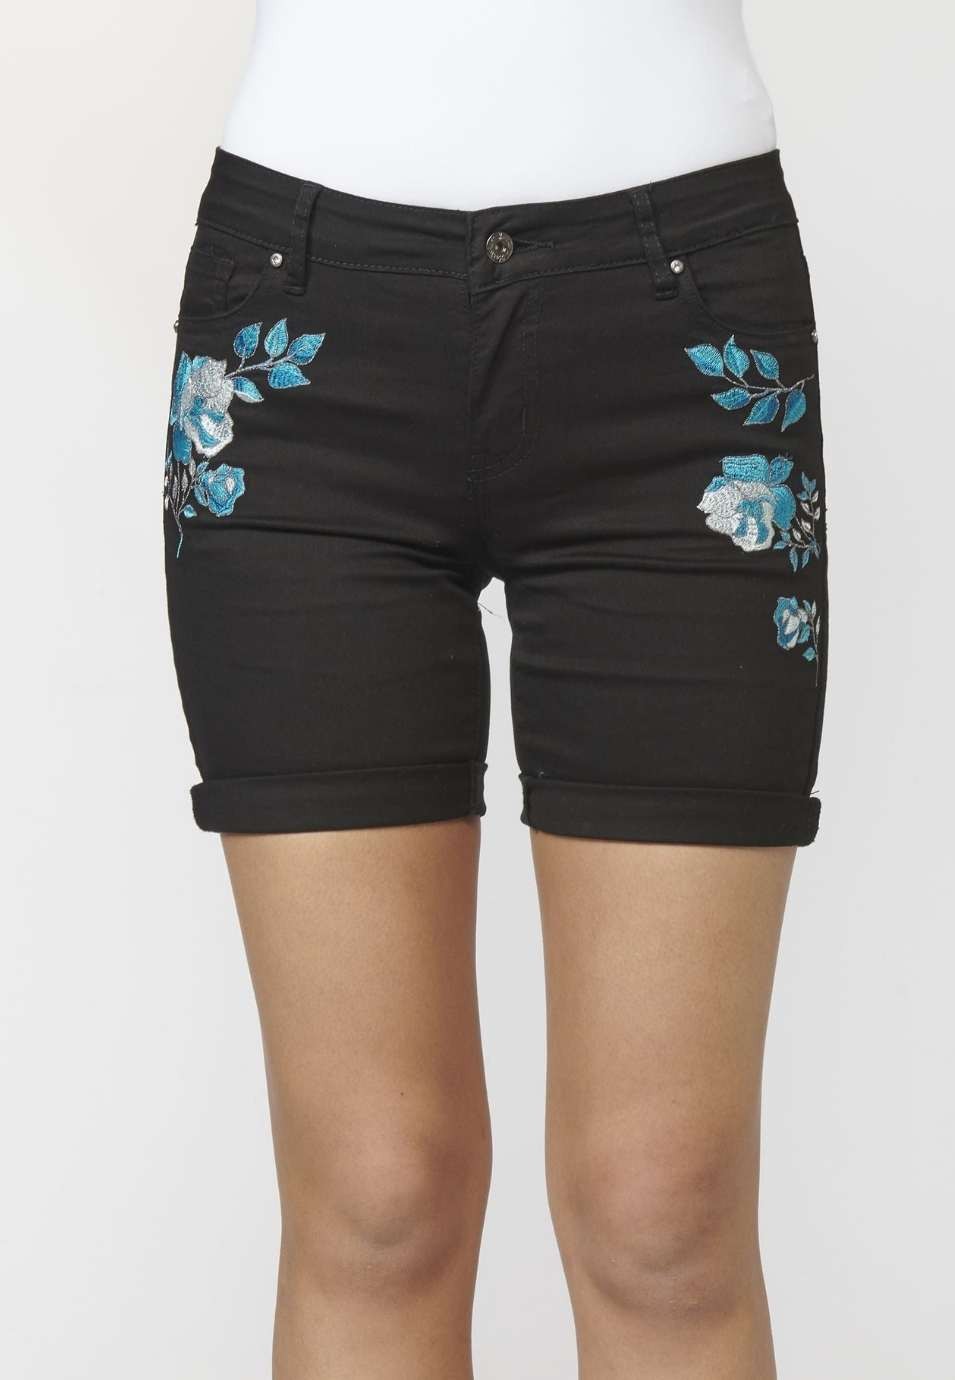 Short Pant with Five Pockets and Floral Embroidery 100% Cotton for Woman in Black color 5